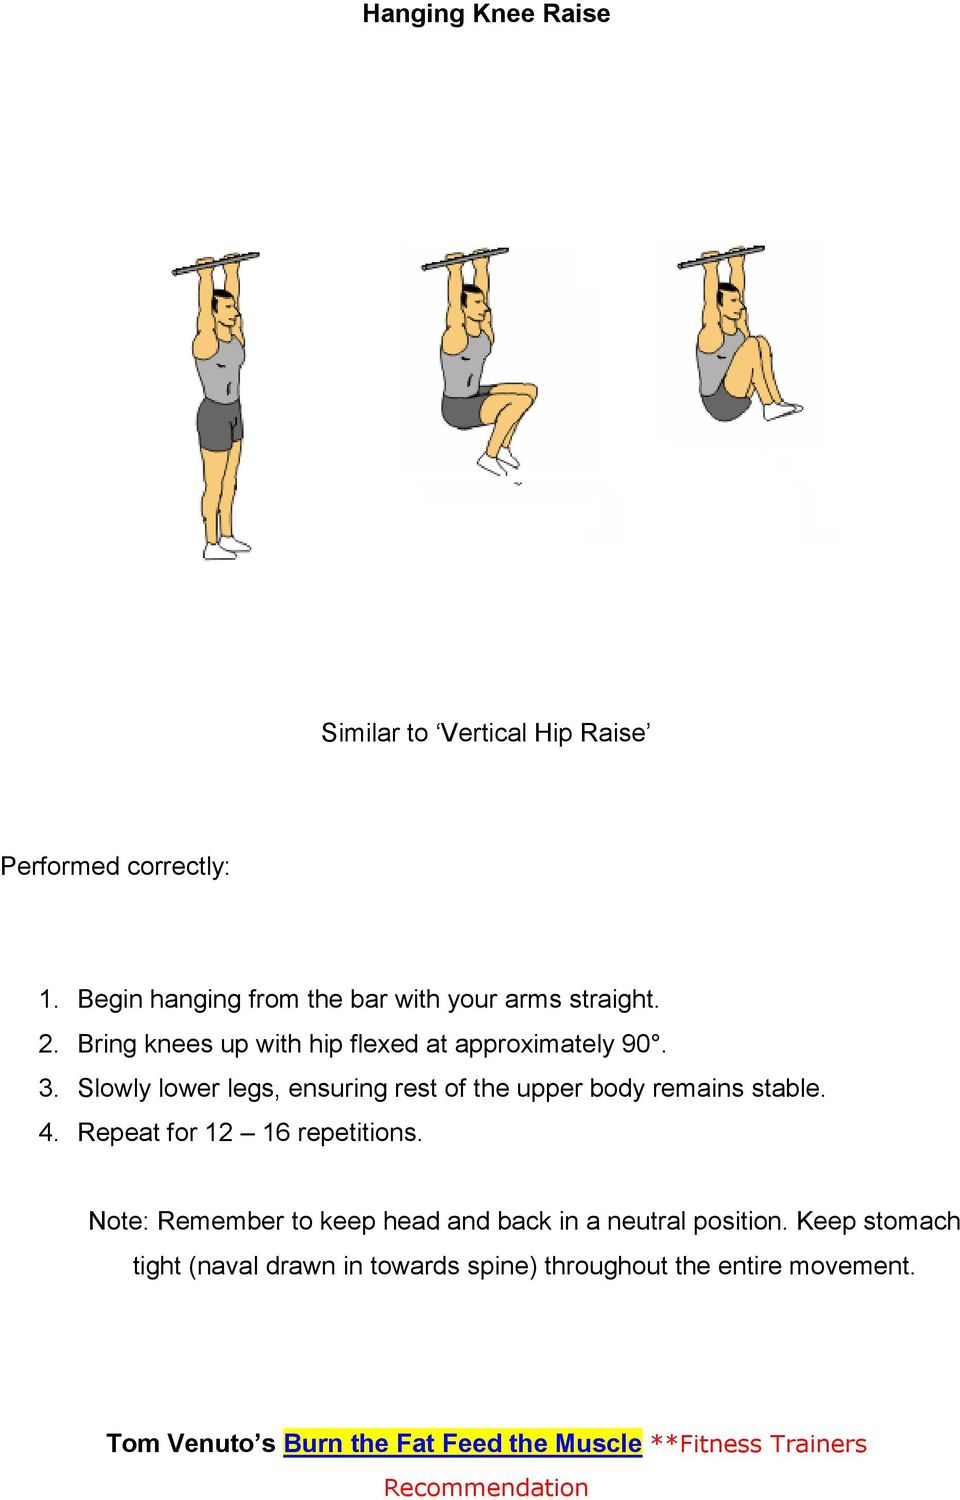 Bring knees up with hip flexed at approximately 90. 3.